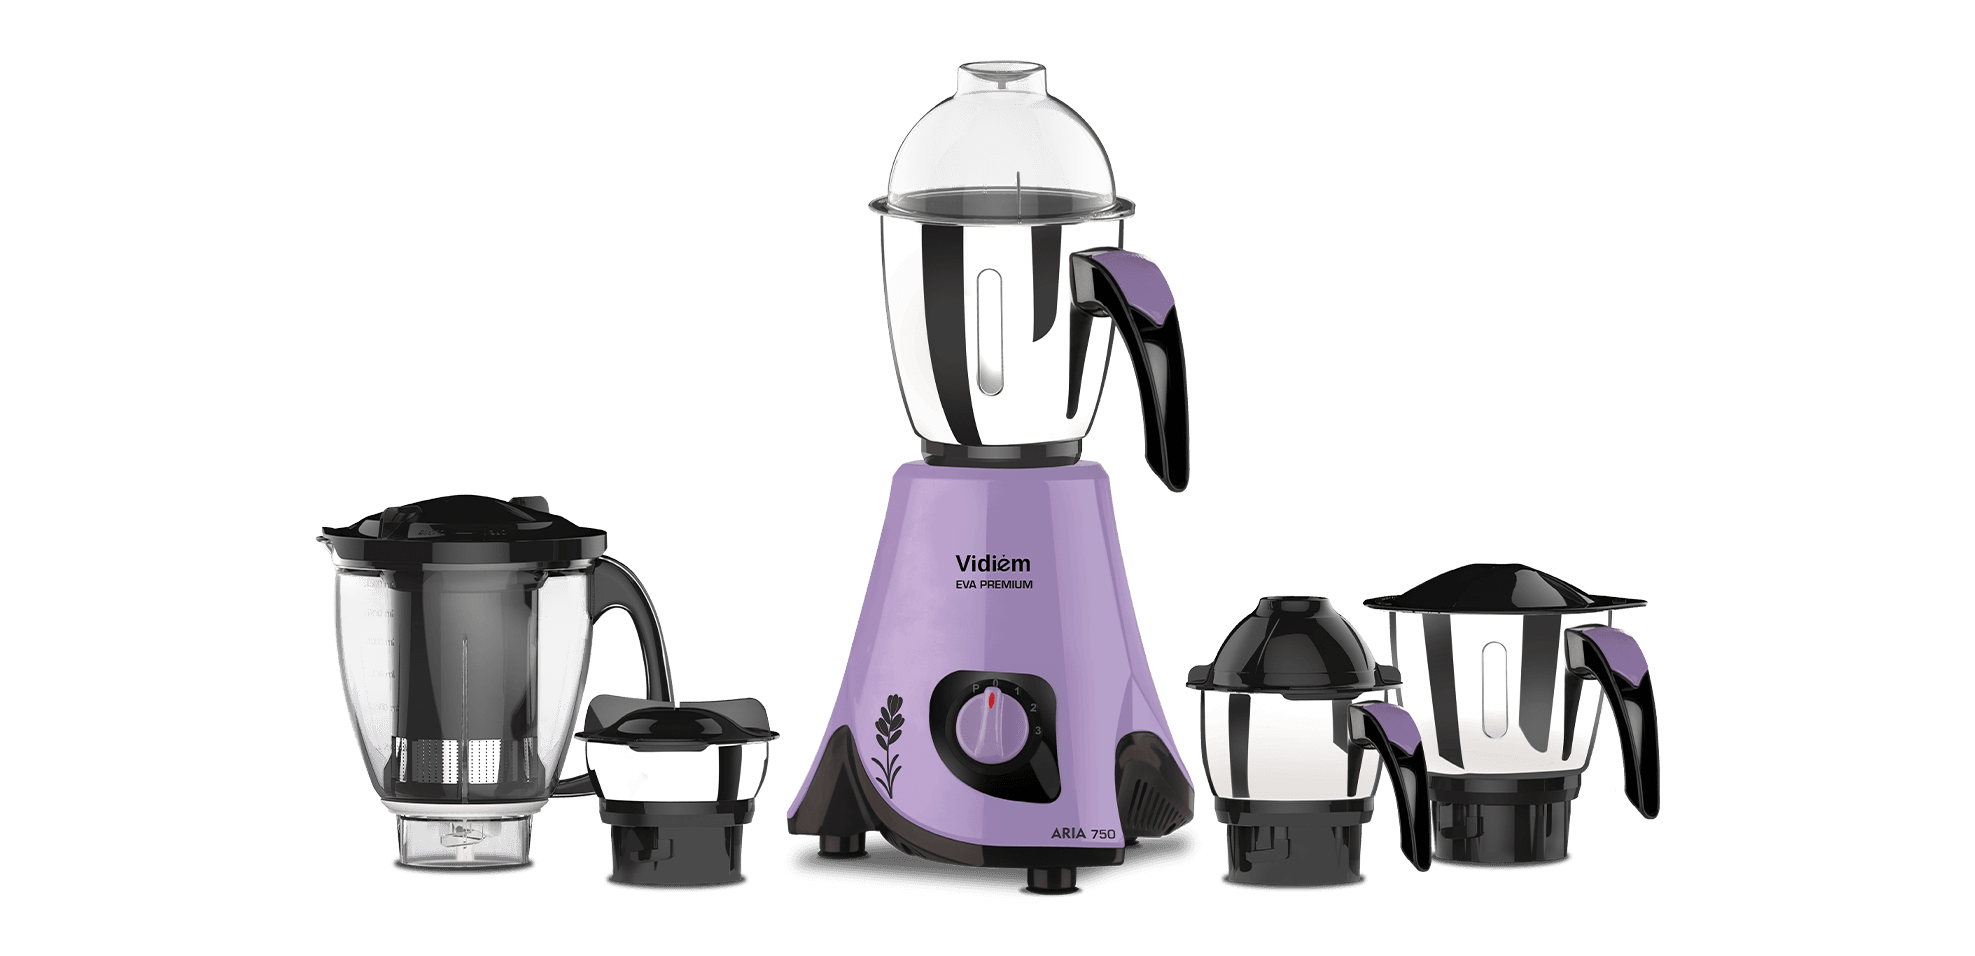 5 uncommon ways to use a mixer grinder in an Indian kitchen